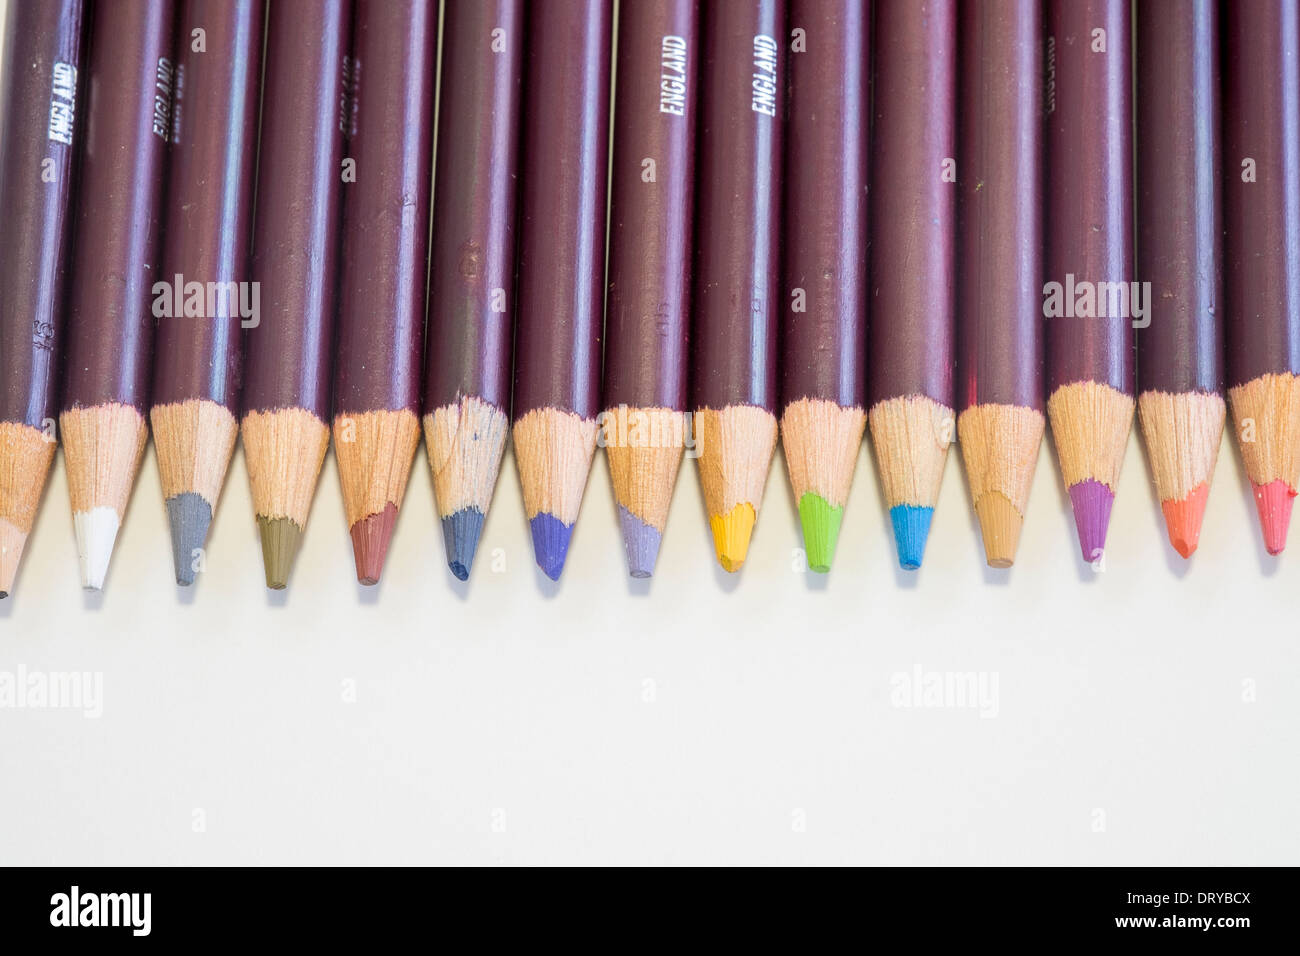 Row of coloured pencil crayon tips on white background Stock Photo